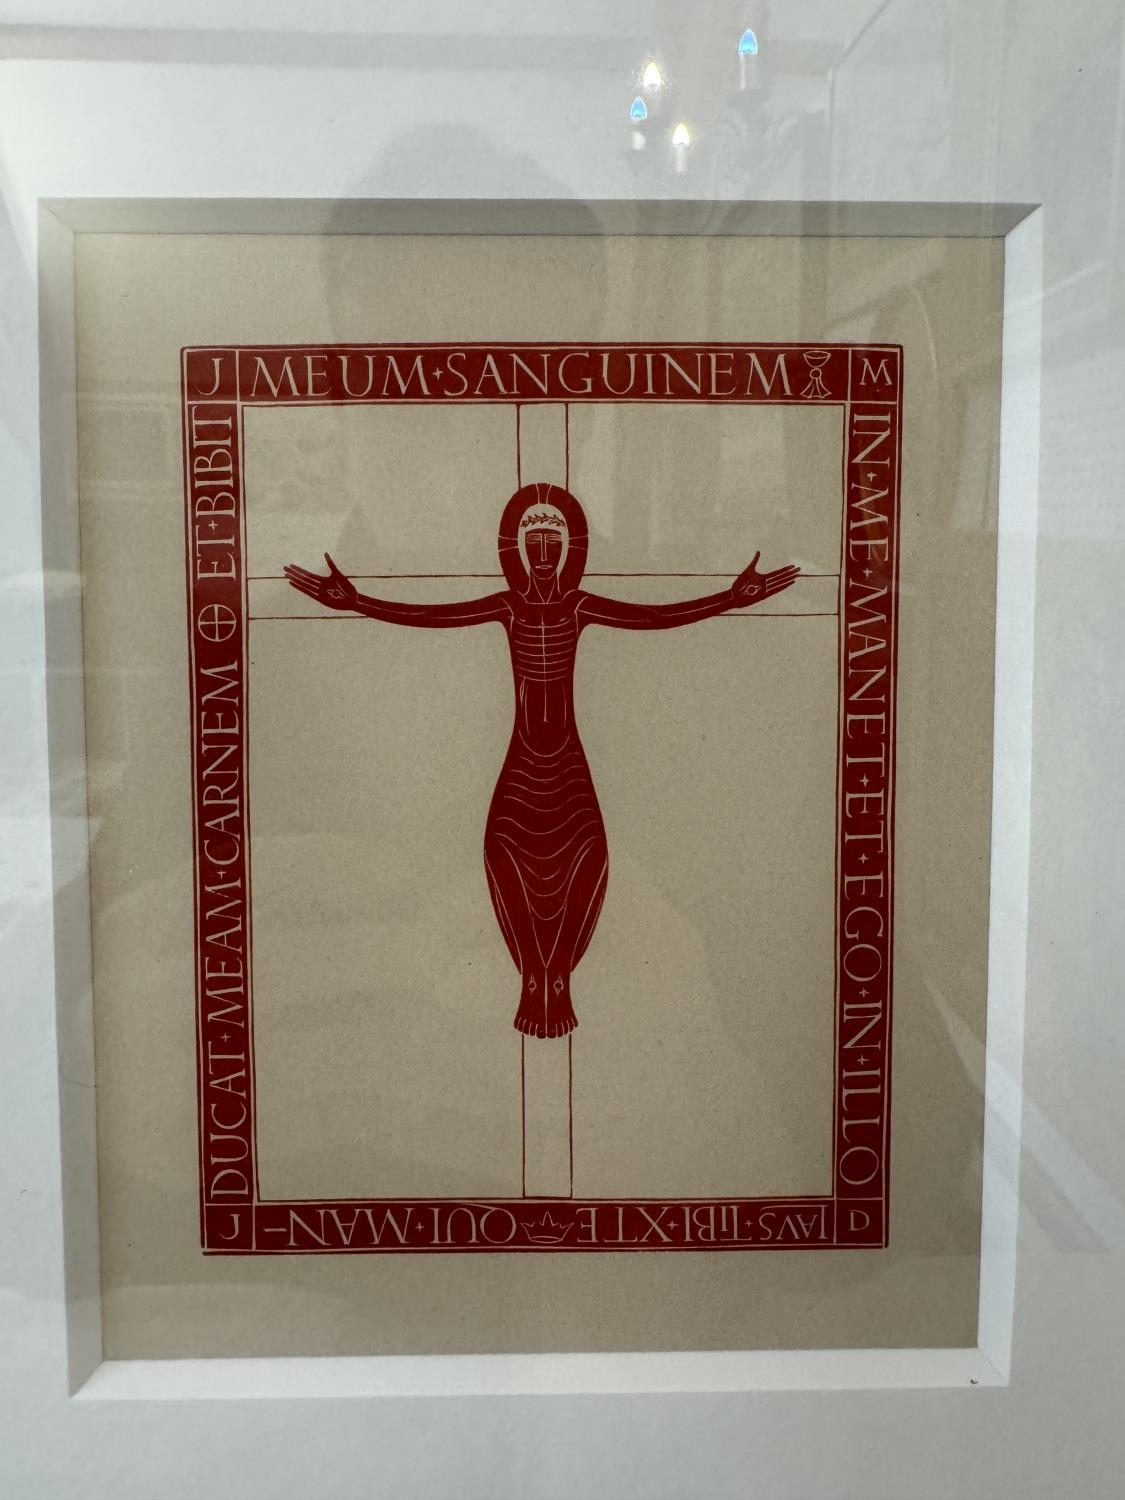 Eric Gill (British, 1882-1940) - 'Crucifix' (1919), woodblock engraving, mounting dimensions: 13 x - Image 2 of 6